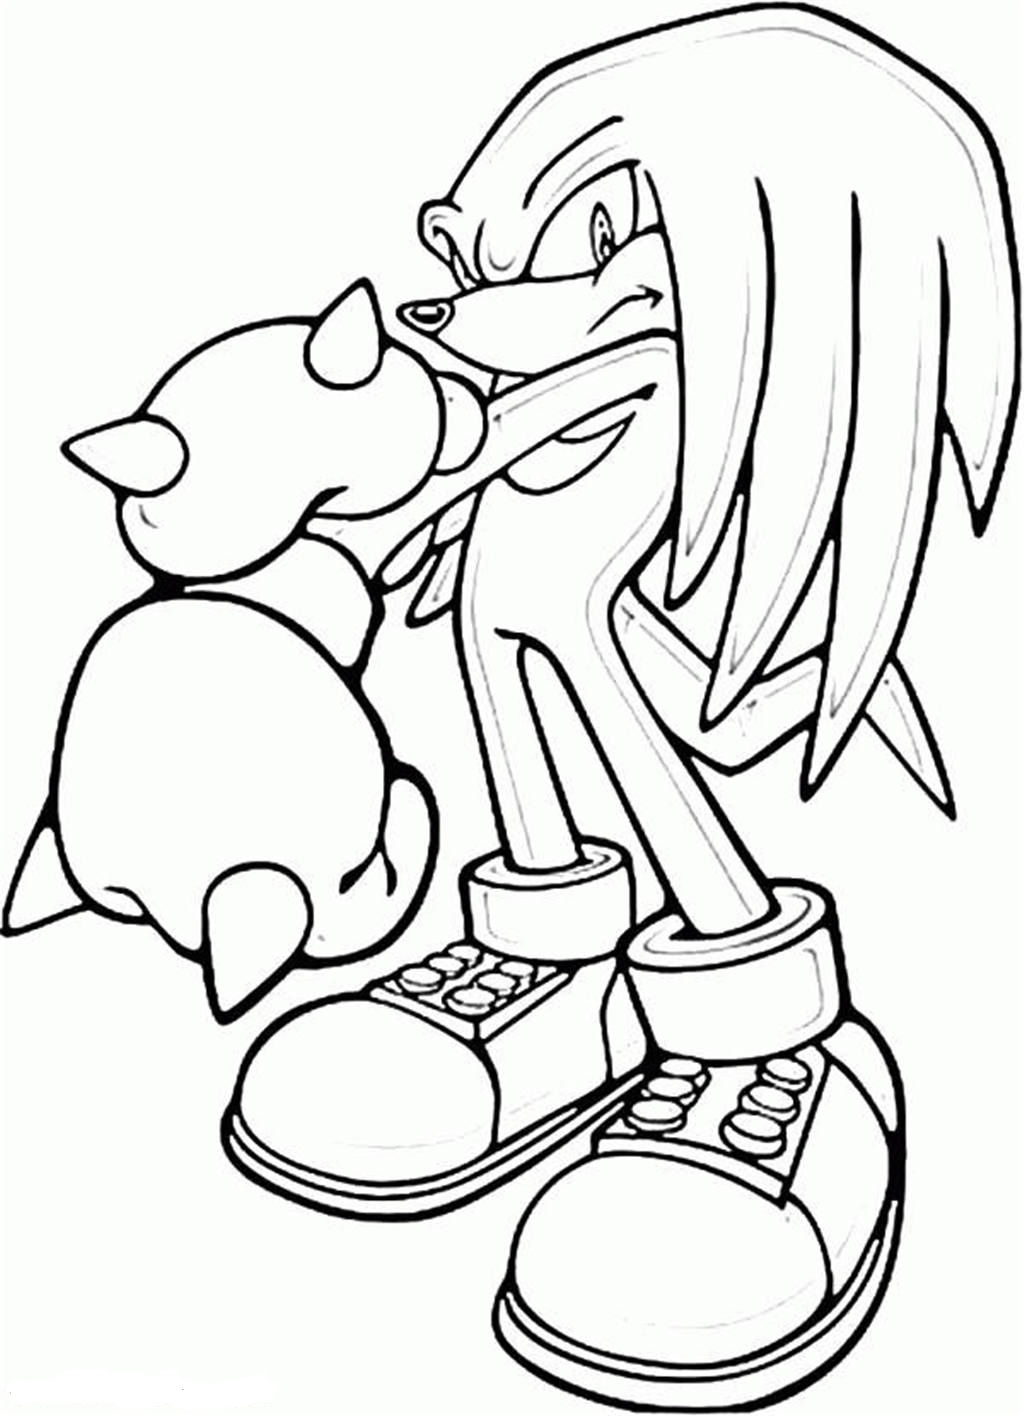 Printable Knuckles Coloring Pages - Knuckles Coloring Page from Sonic the Hedgehog